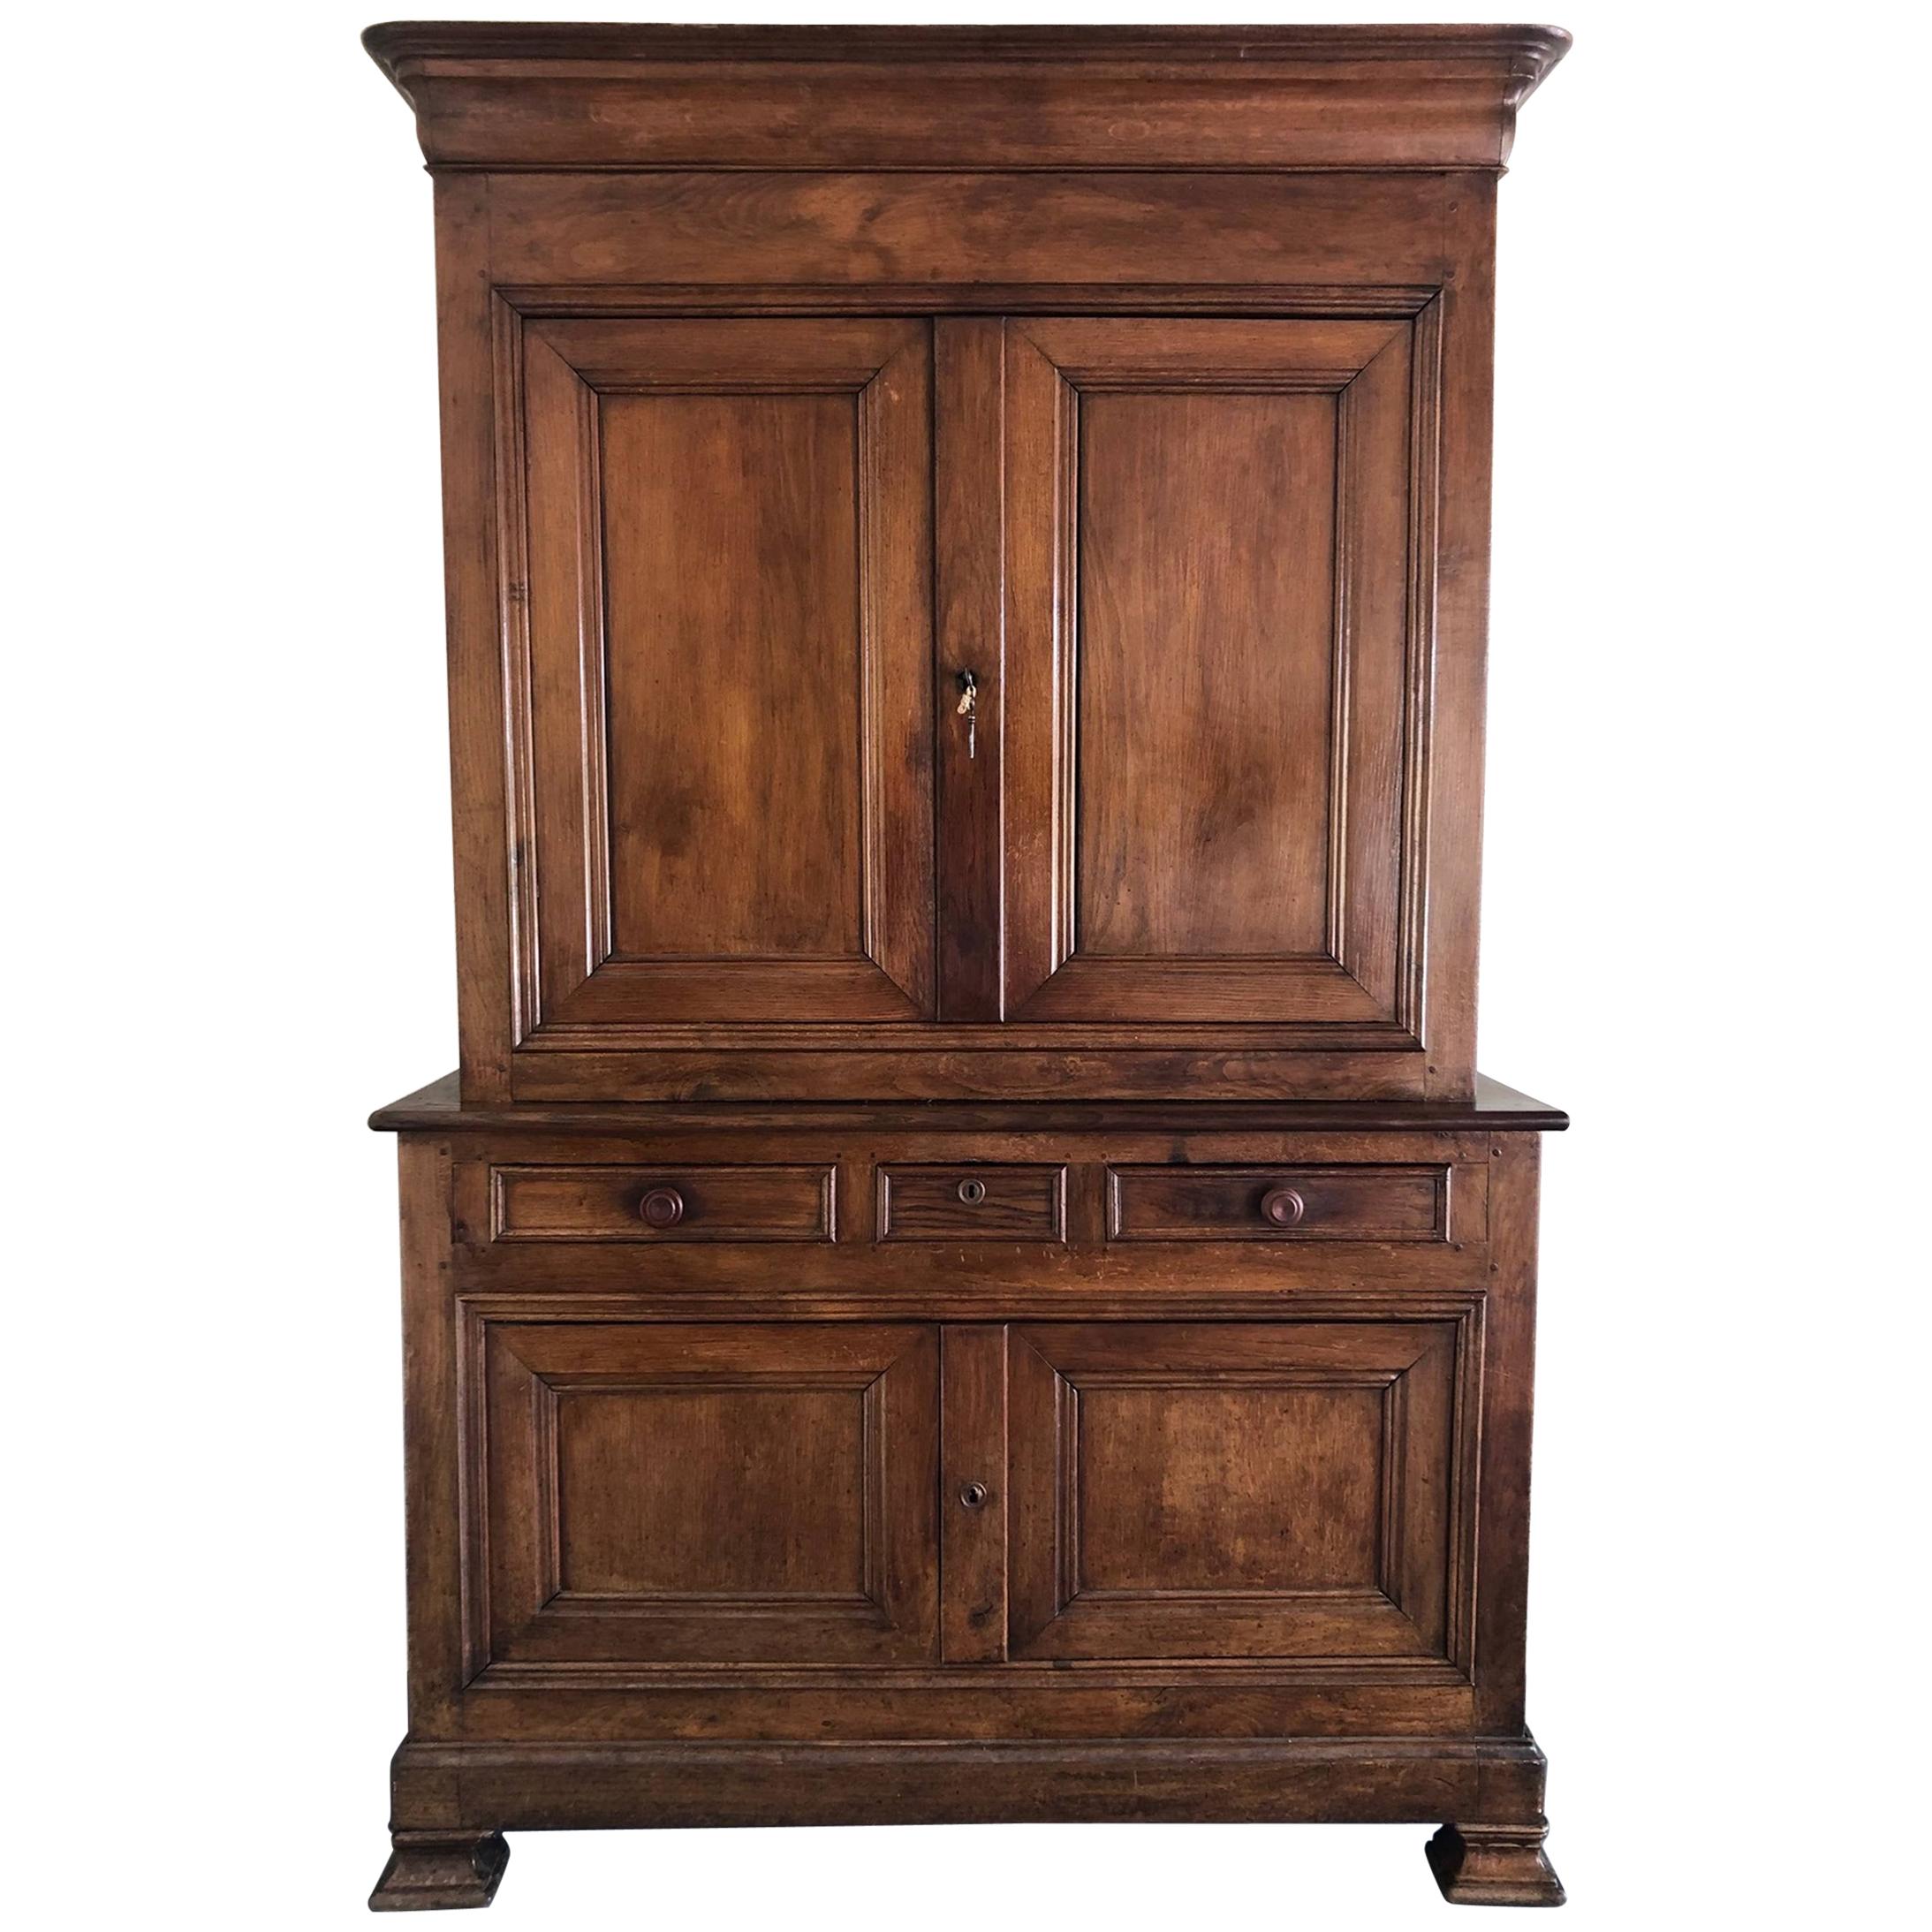 Impressive French 19th Century Walnut Deux Corps Buffet Cabinet